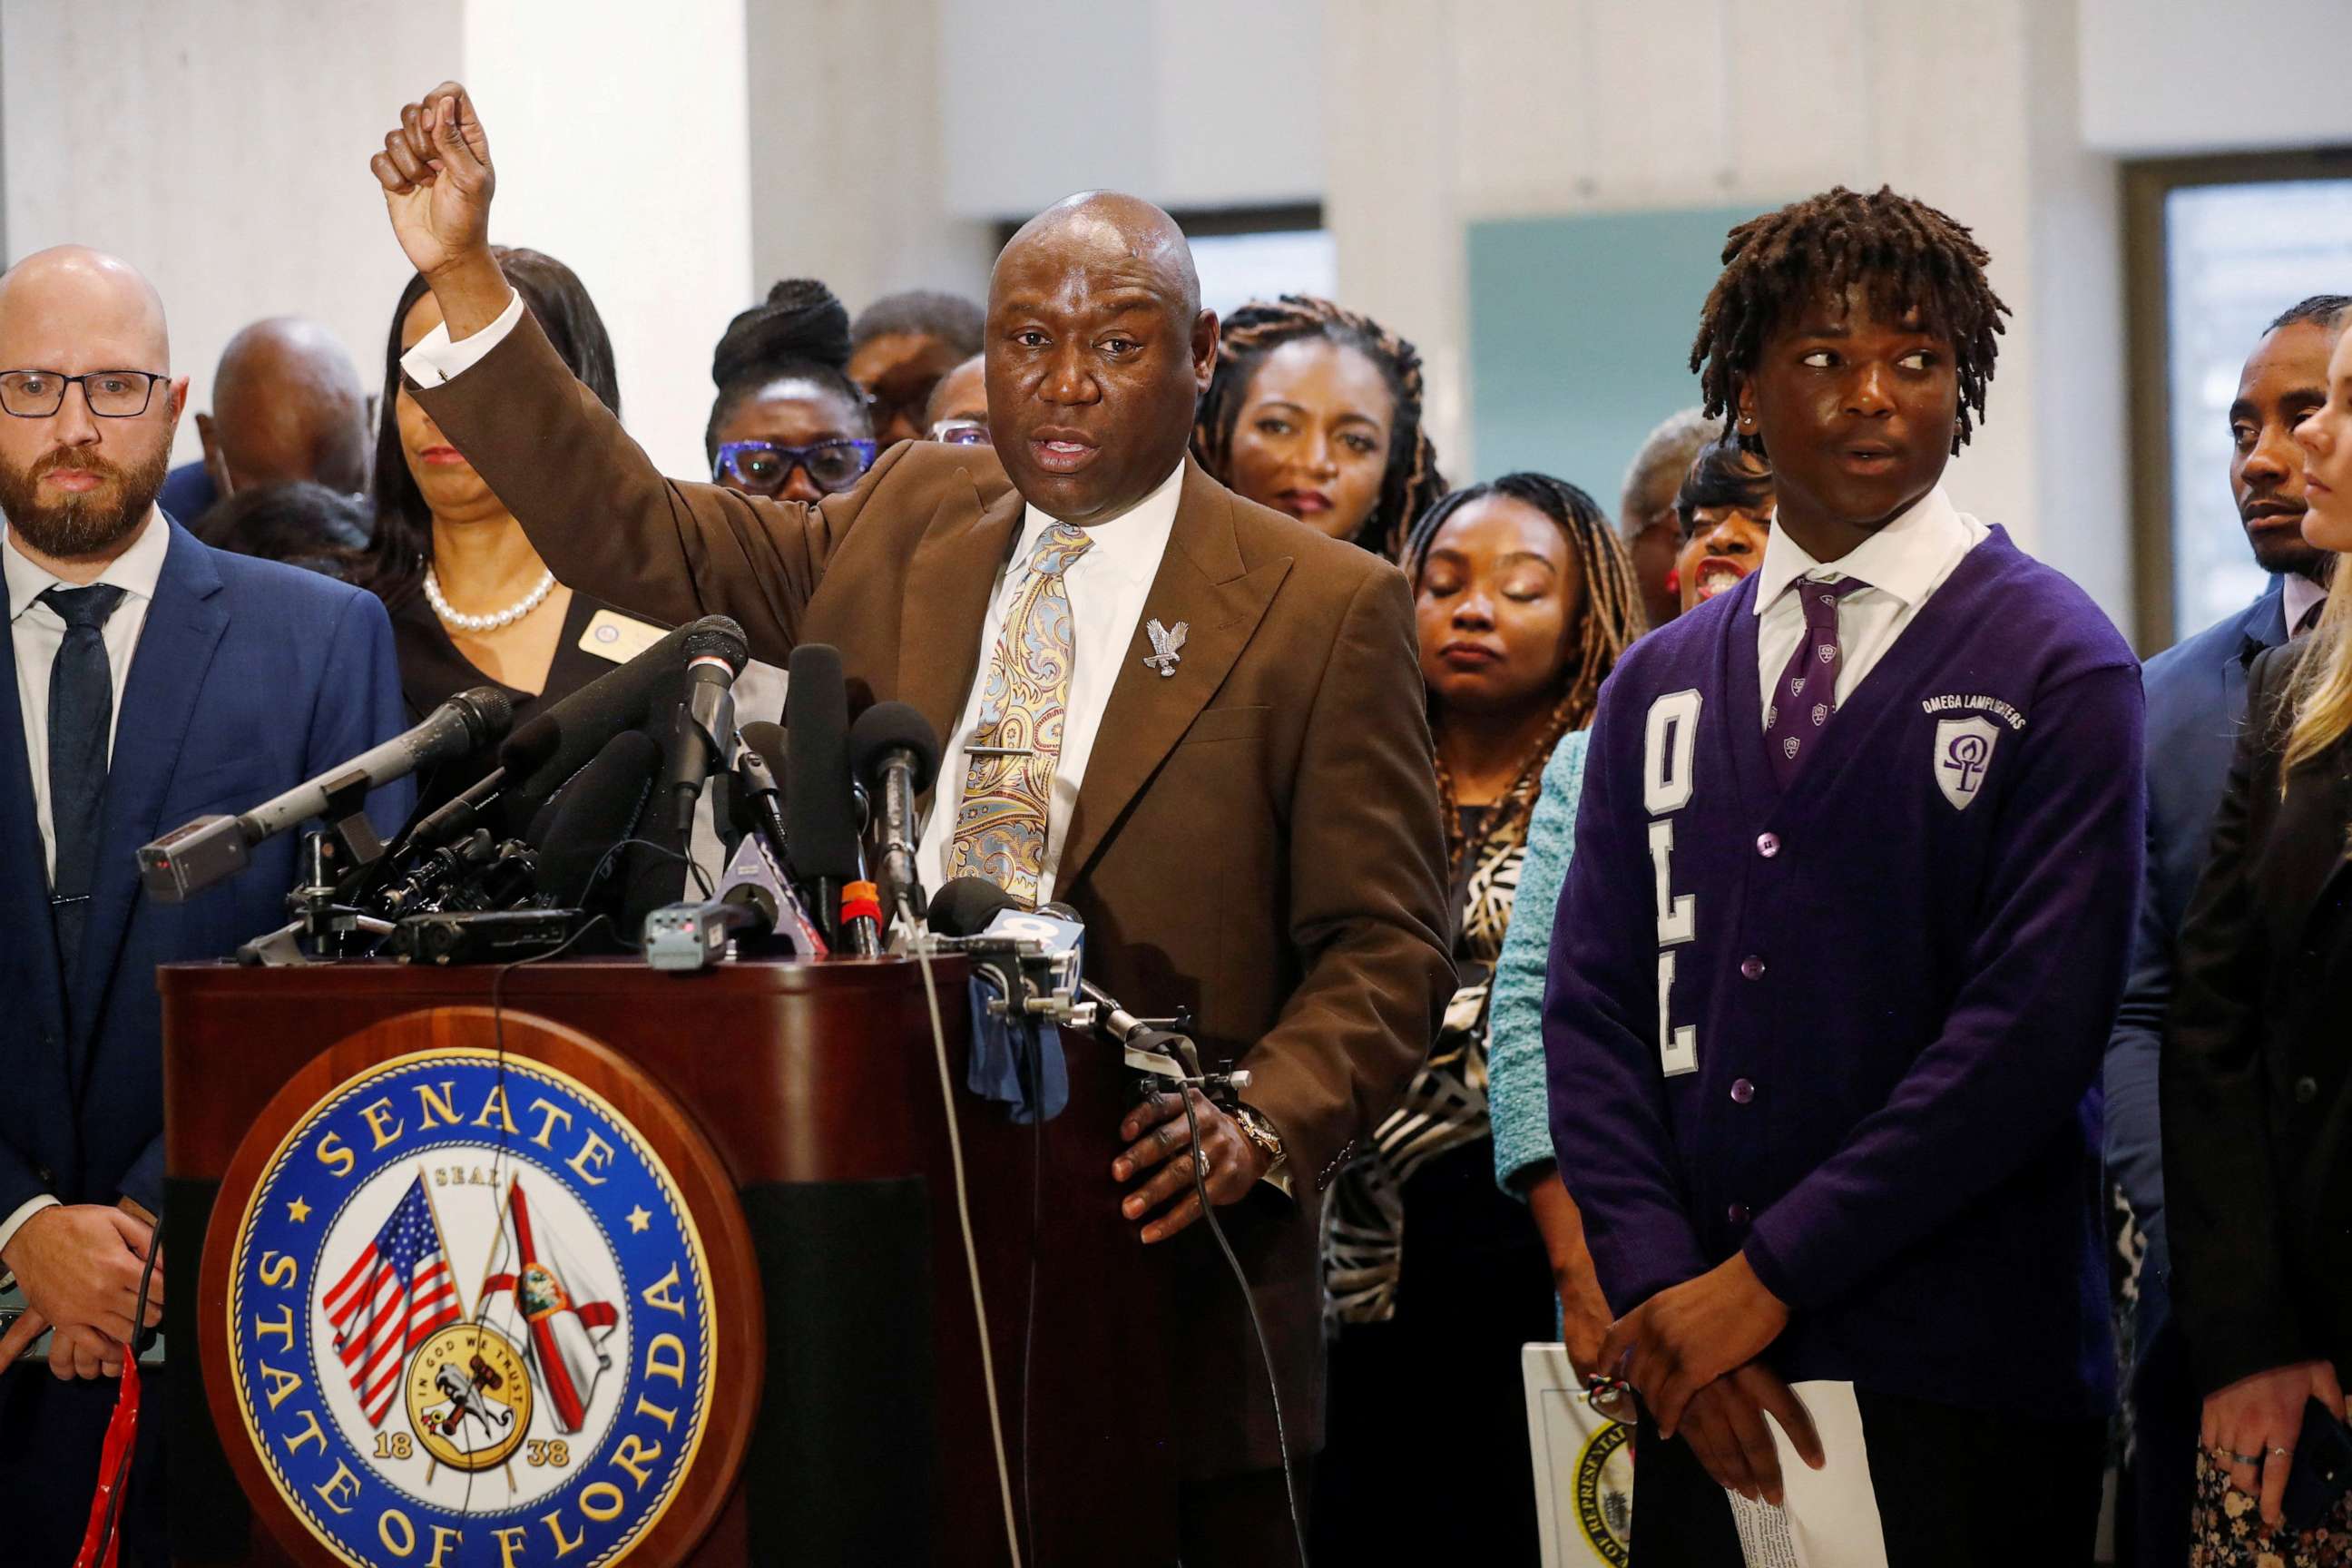 PHOTO: Civil Rights attorney Ben Crump speaks during a "Stop The Black Attack" rally against ongoing state legislation at the Florida State Capitol building in Tallahassee, Florida, January 25, 2023.